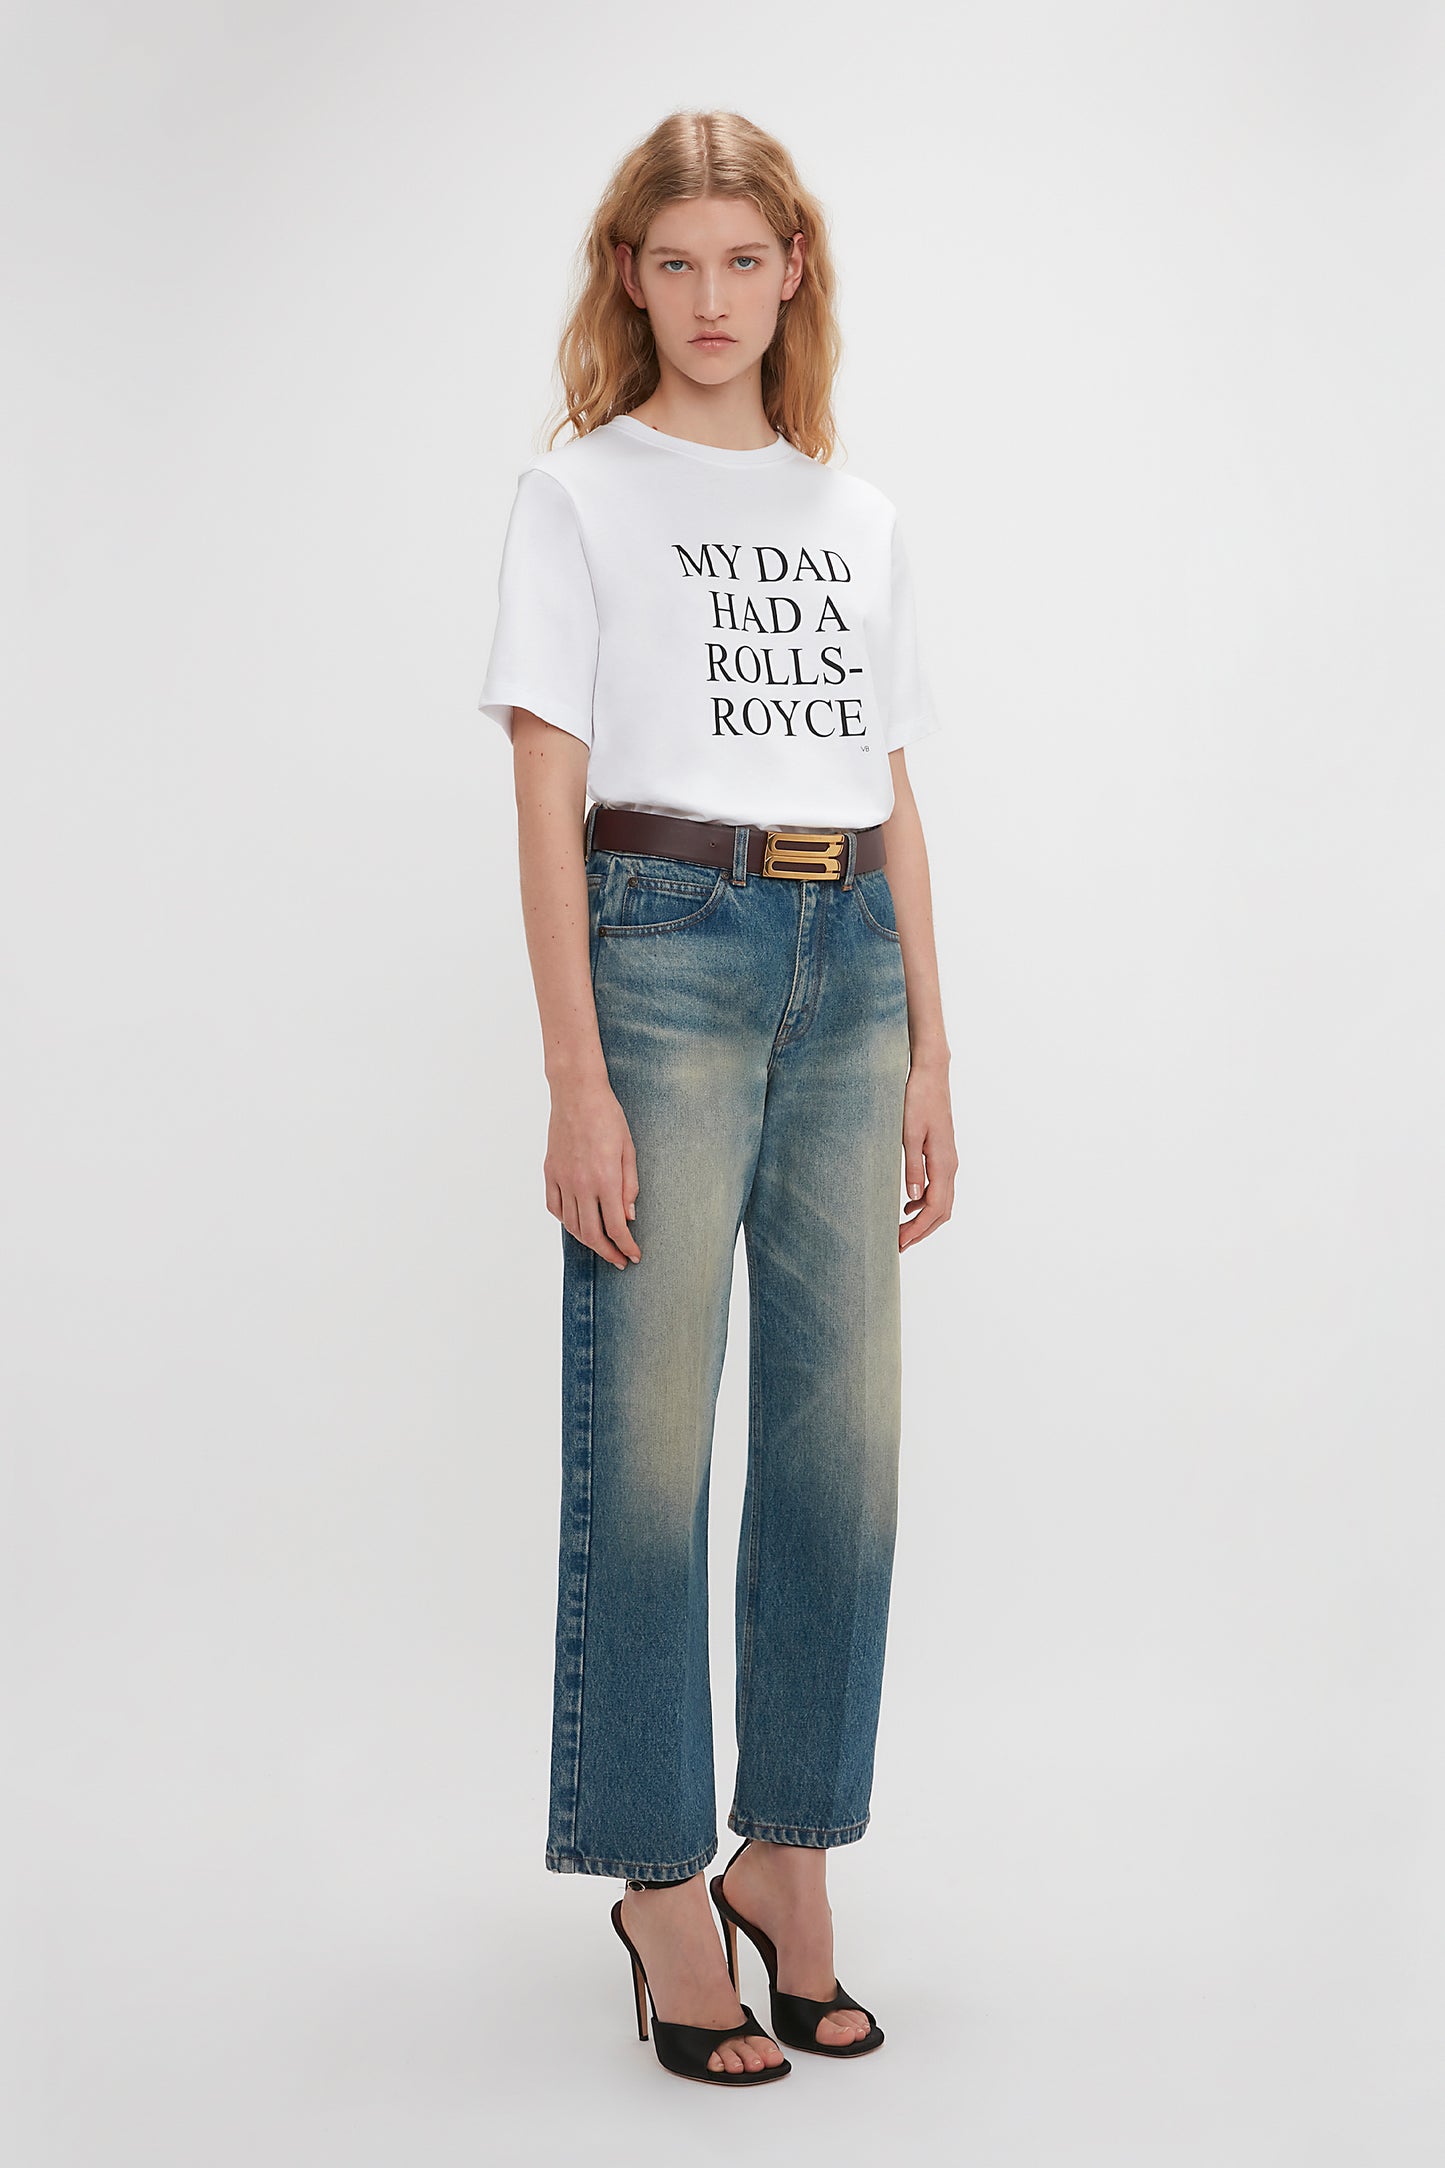 Young woman in a relaxed fit Victoria Beckham white t-shirt with the slogan "my dad has a rolls royce" and blue jeans, standing against a seamless white background.